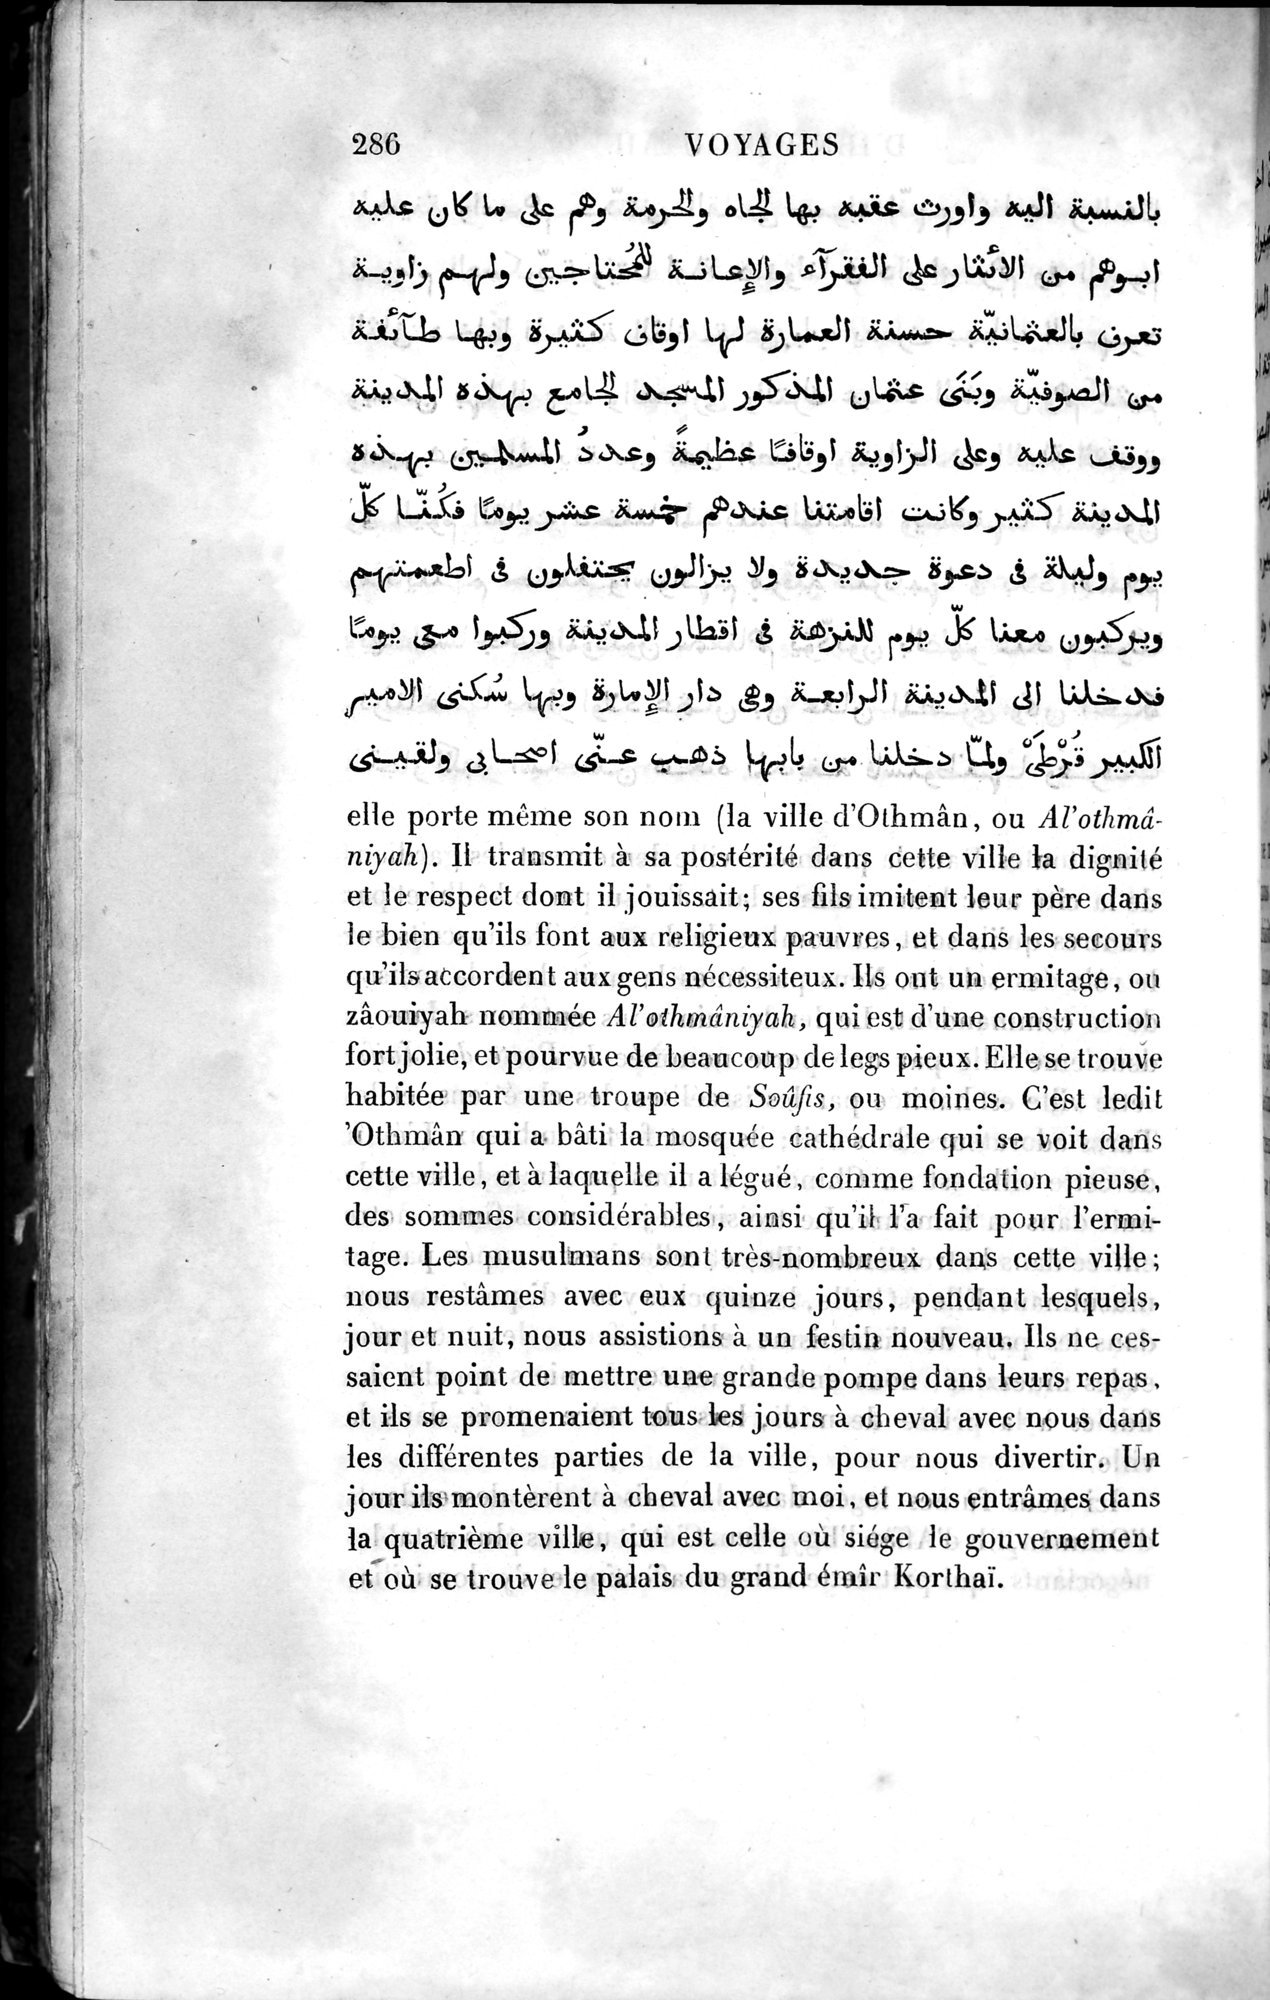 Voyages d'Ibn Batoutah : vol.4 / Page 298 (Grayscale High Resolution Image)